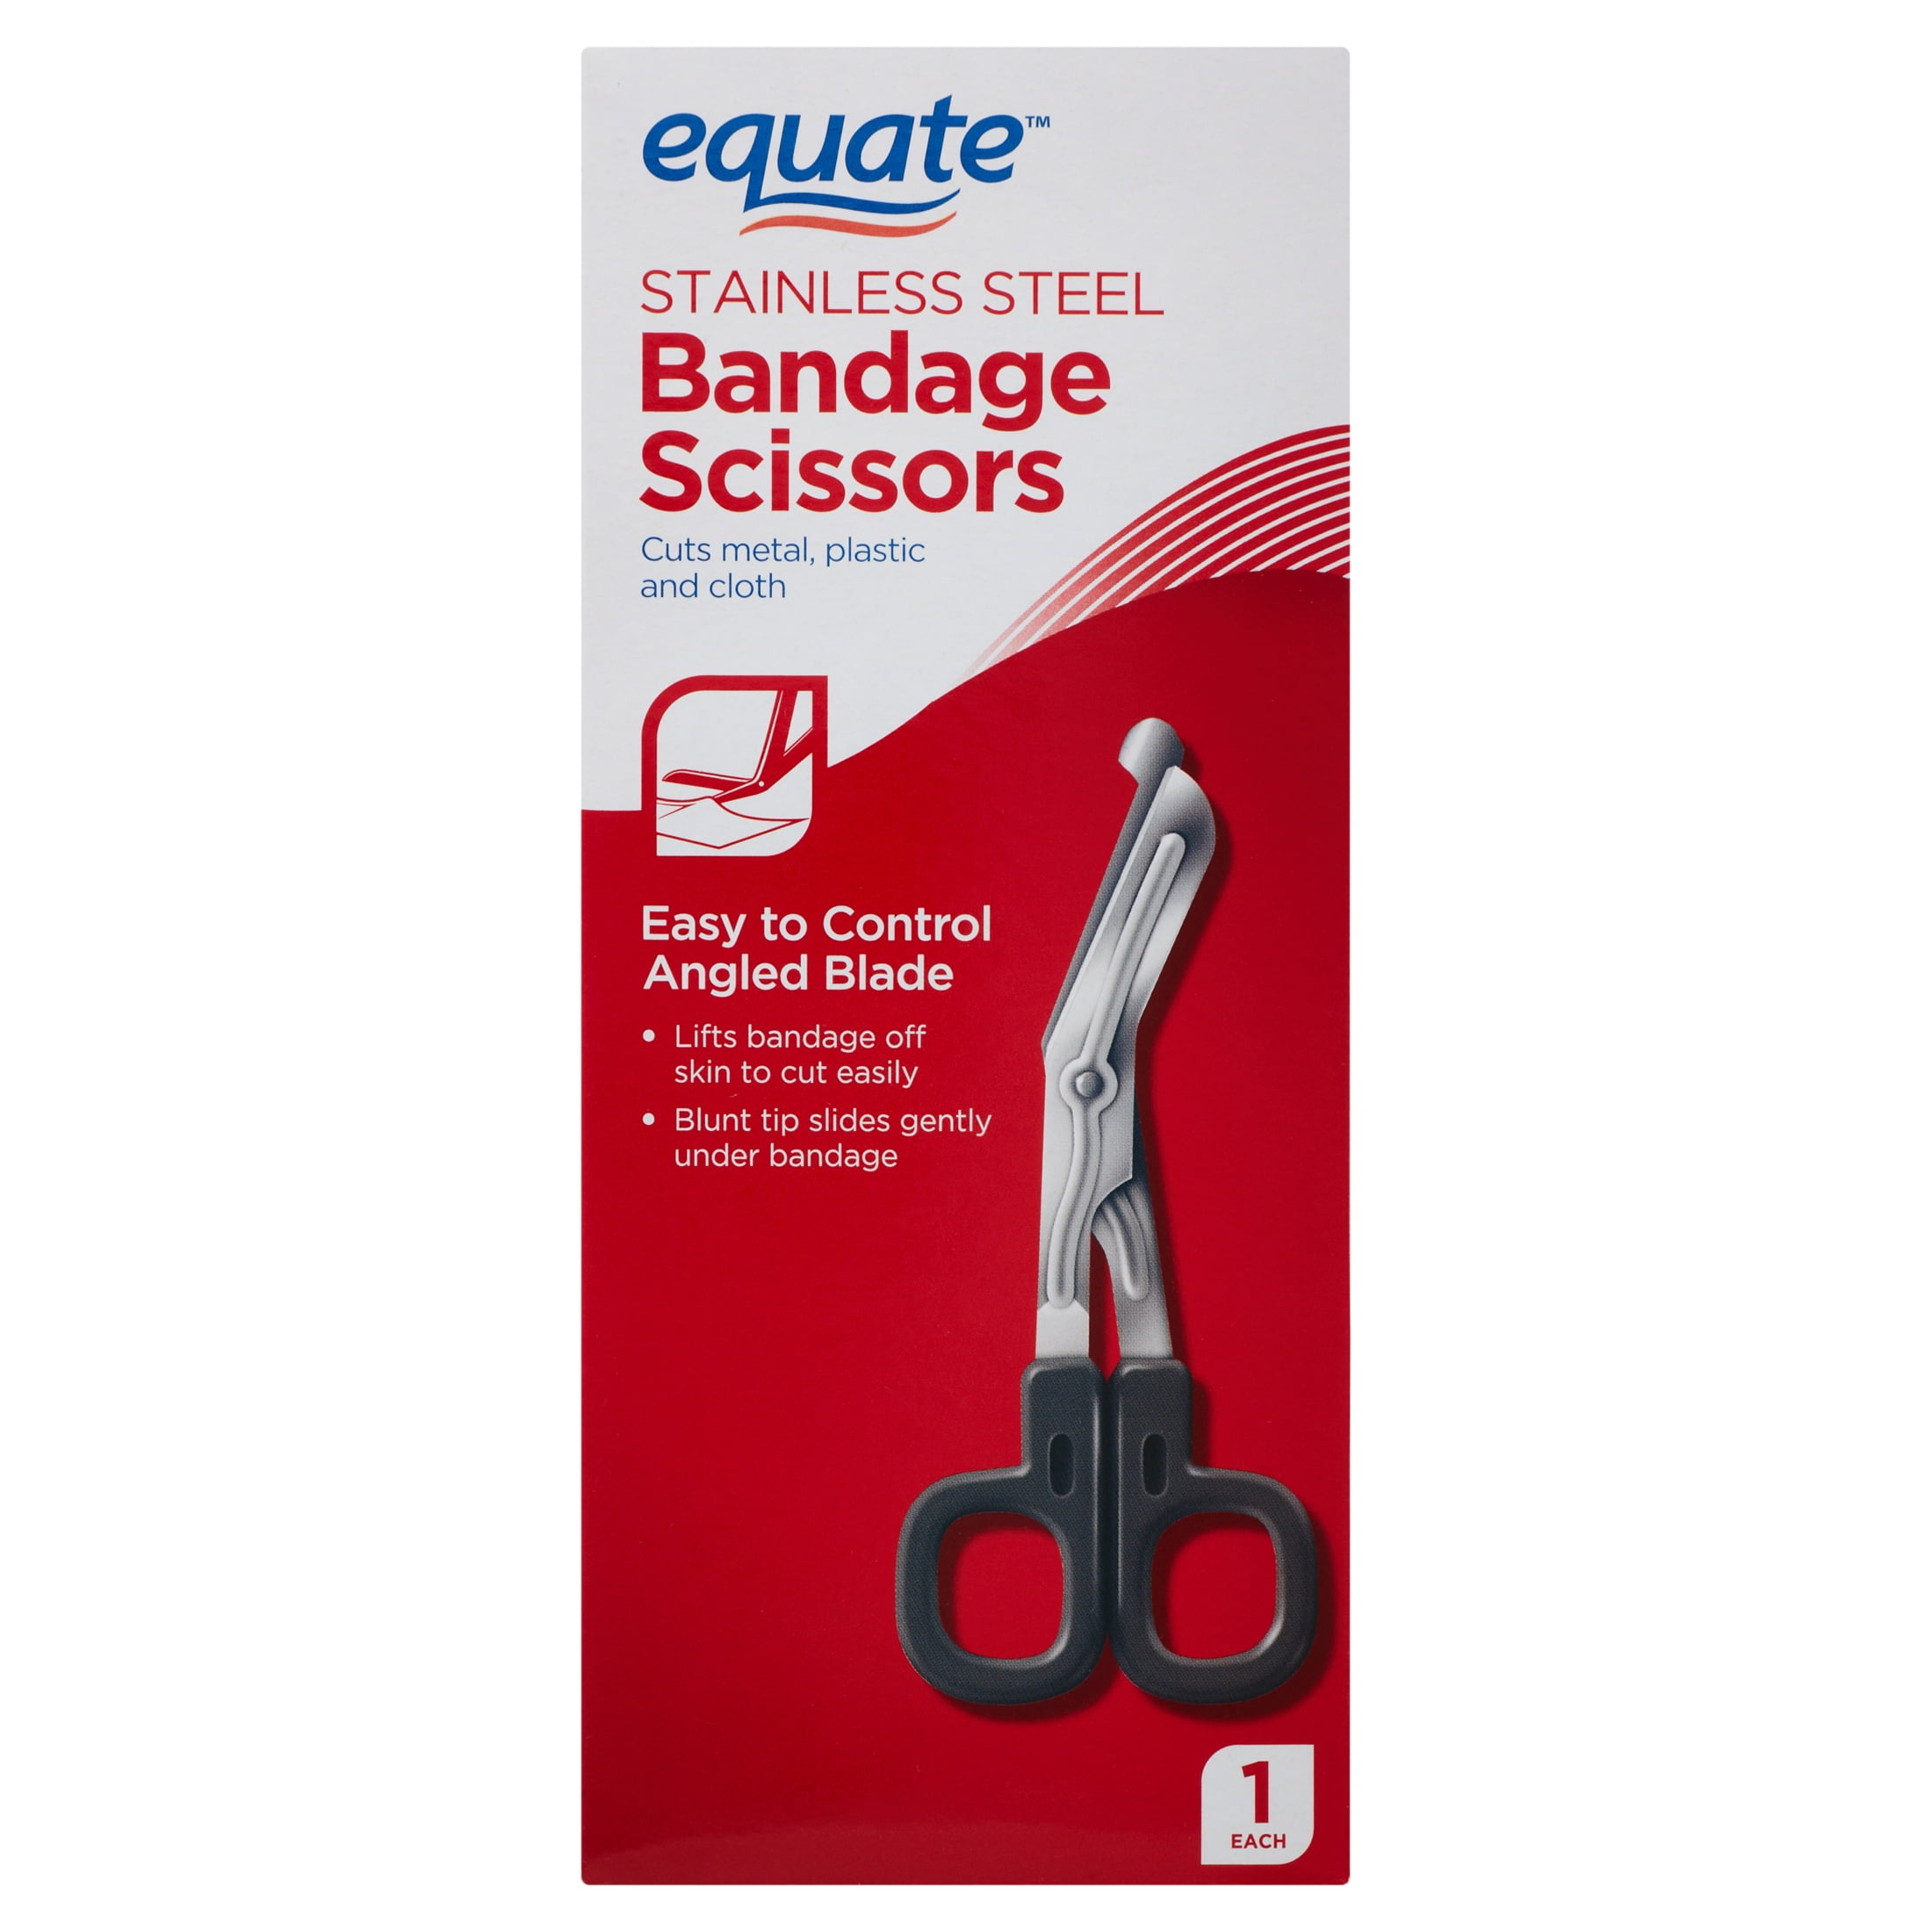 Equate Stainless Steel Bandage Scissors, 1 Count